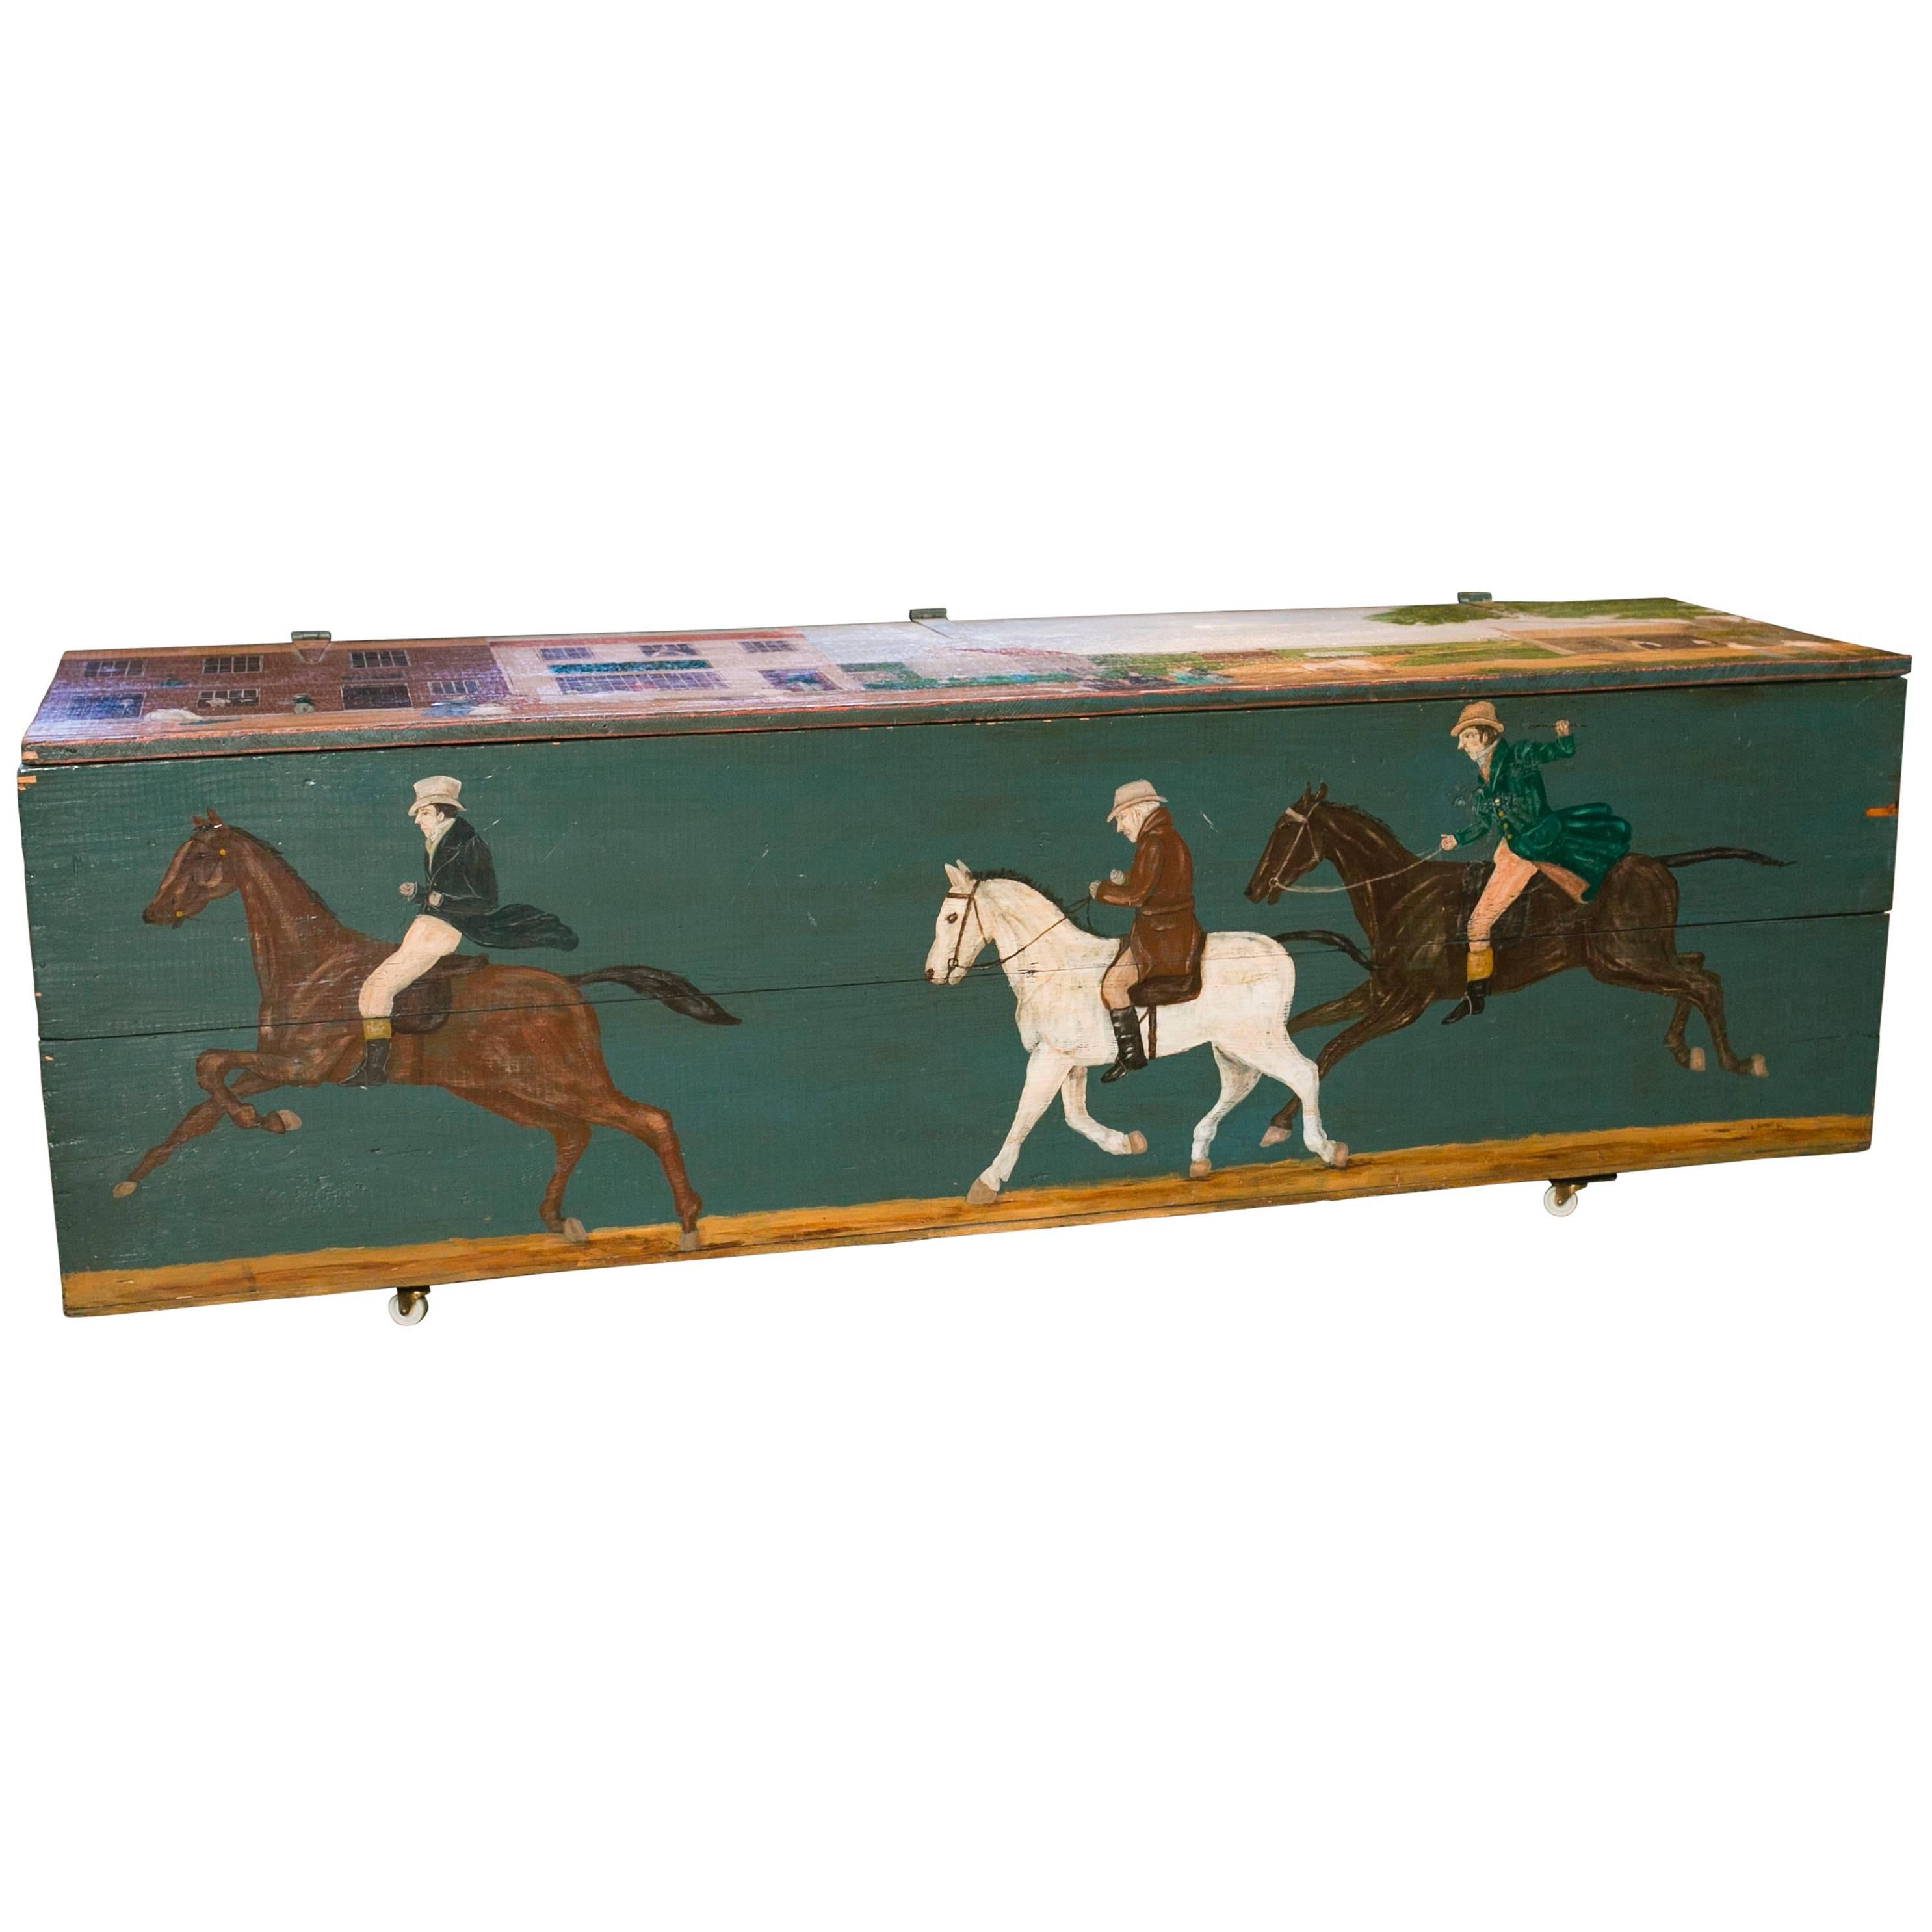  American Blanket Chest/ Bencwith Equestrian Scene Painted by Artist Lew Hudnall